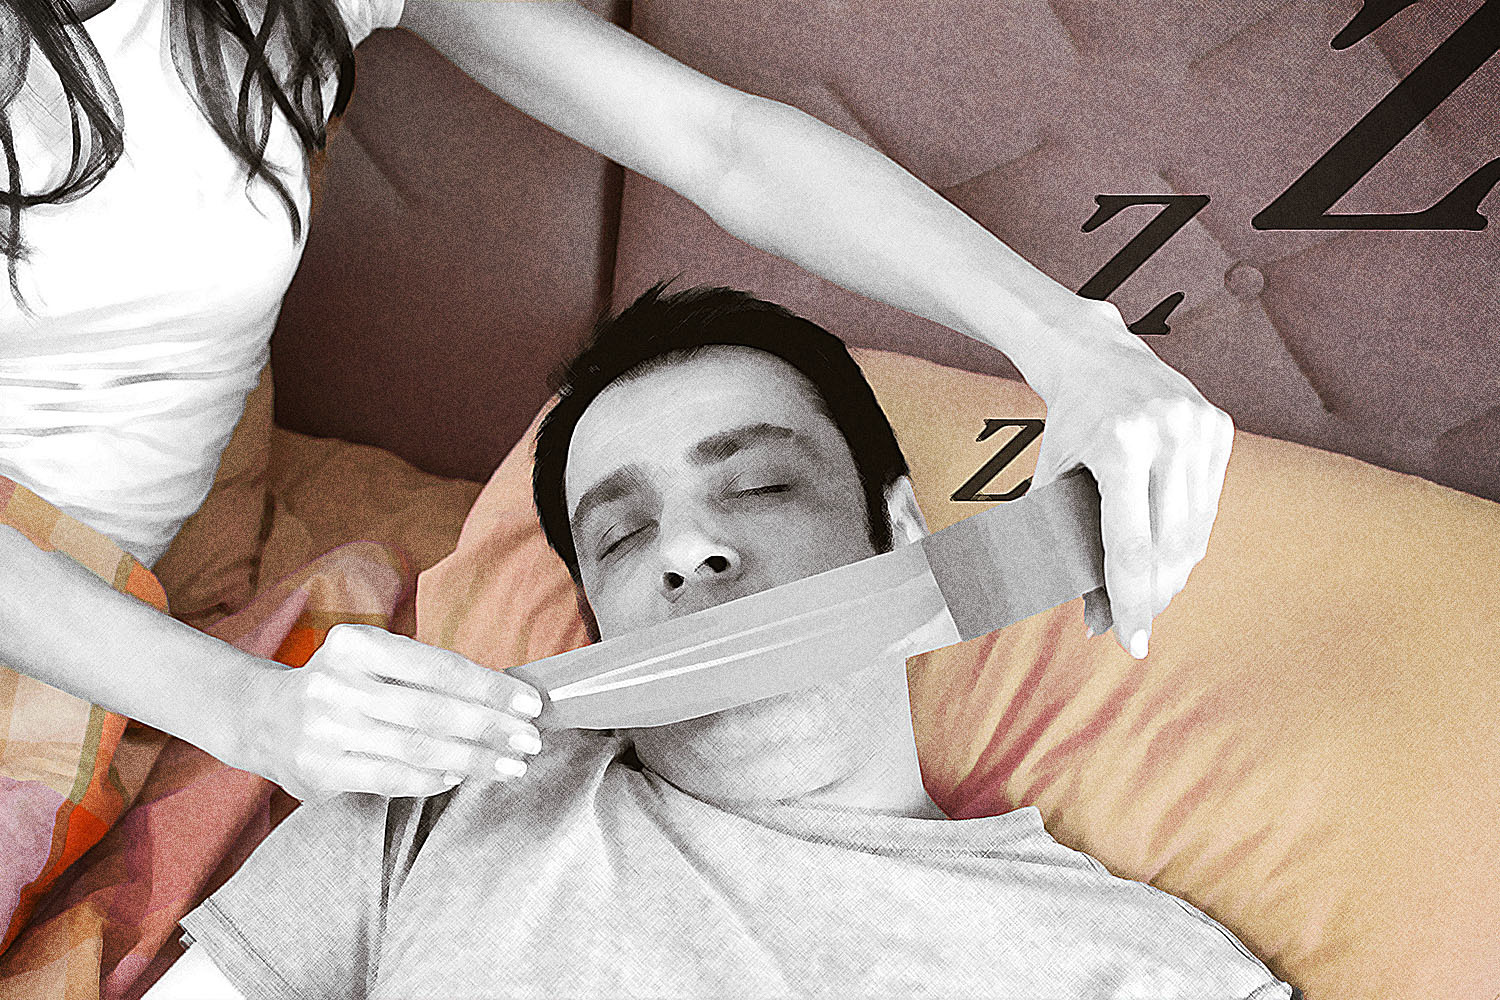 Image shows a sleeping man having duct tape applied across his mouth by a partner